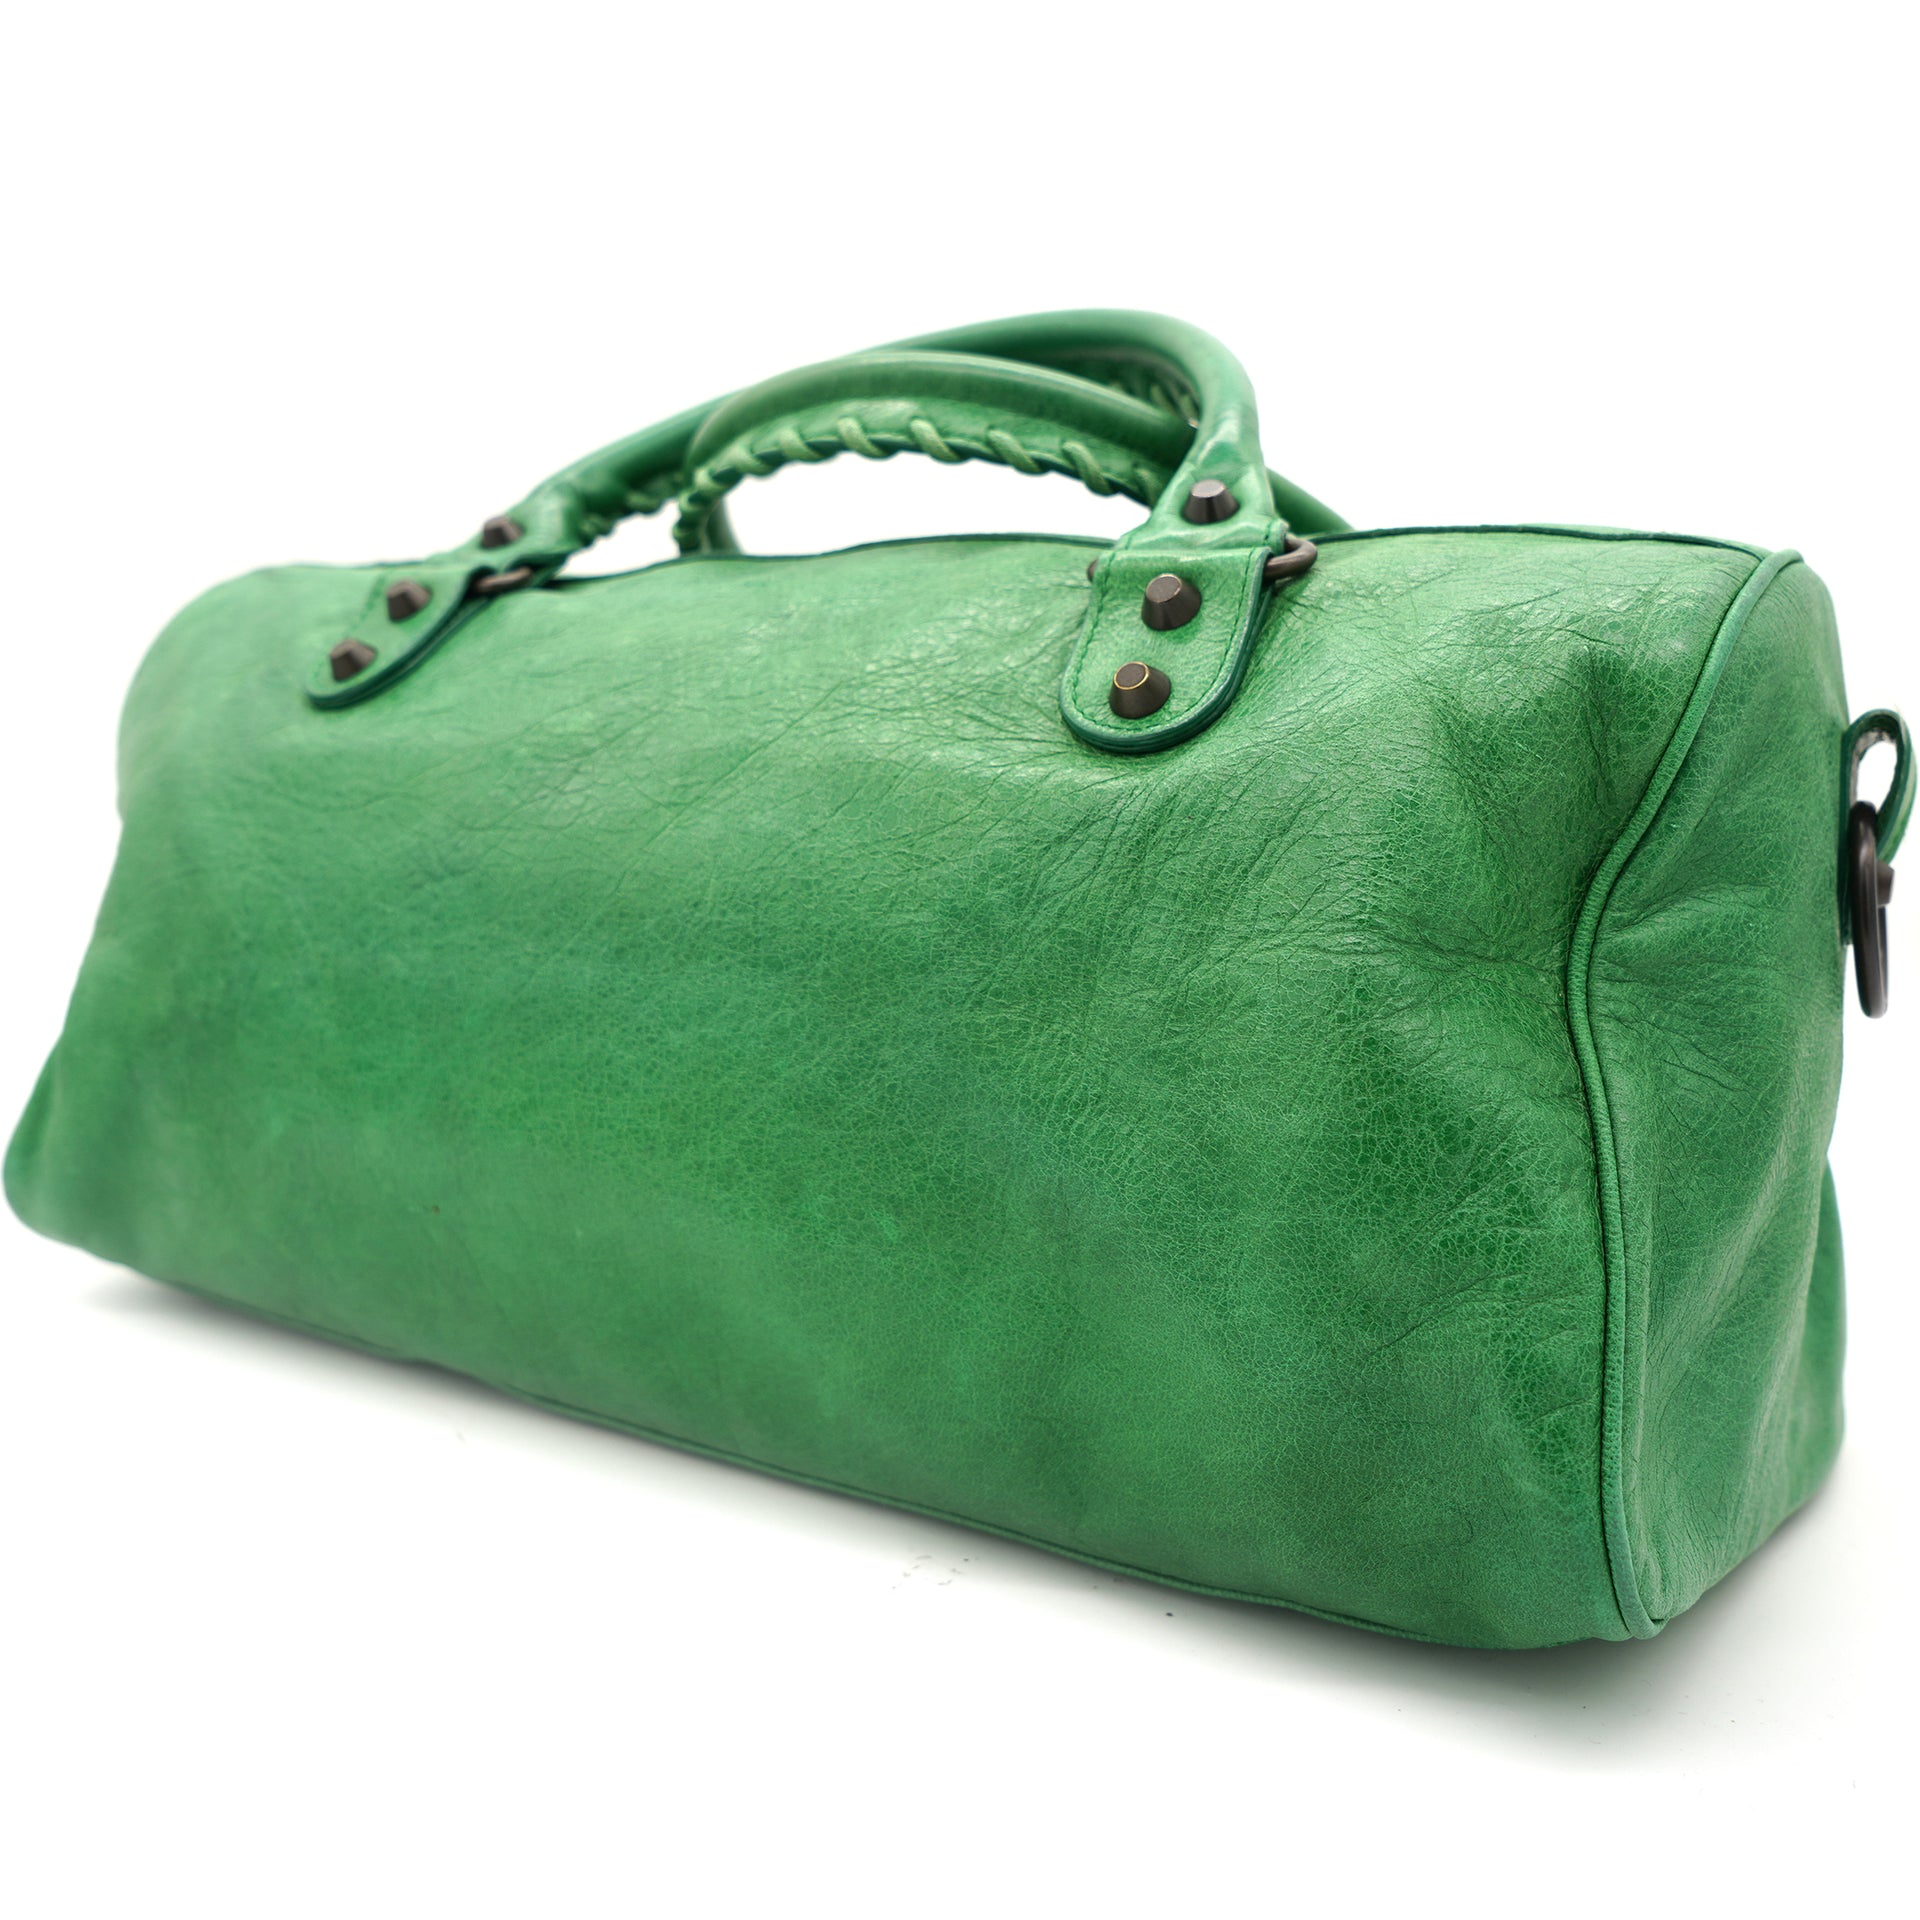 Green Lambskin Leather Motorcycle City Bag